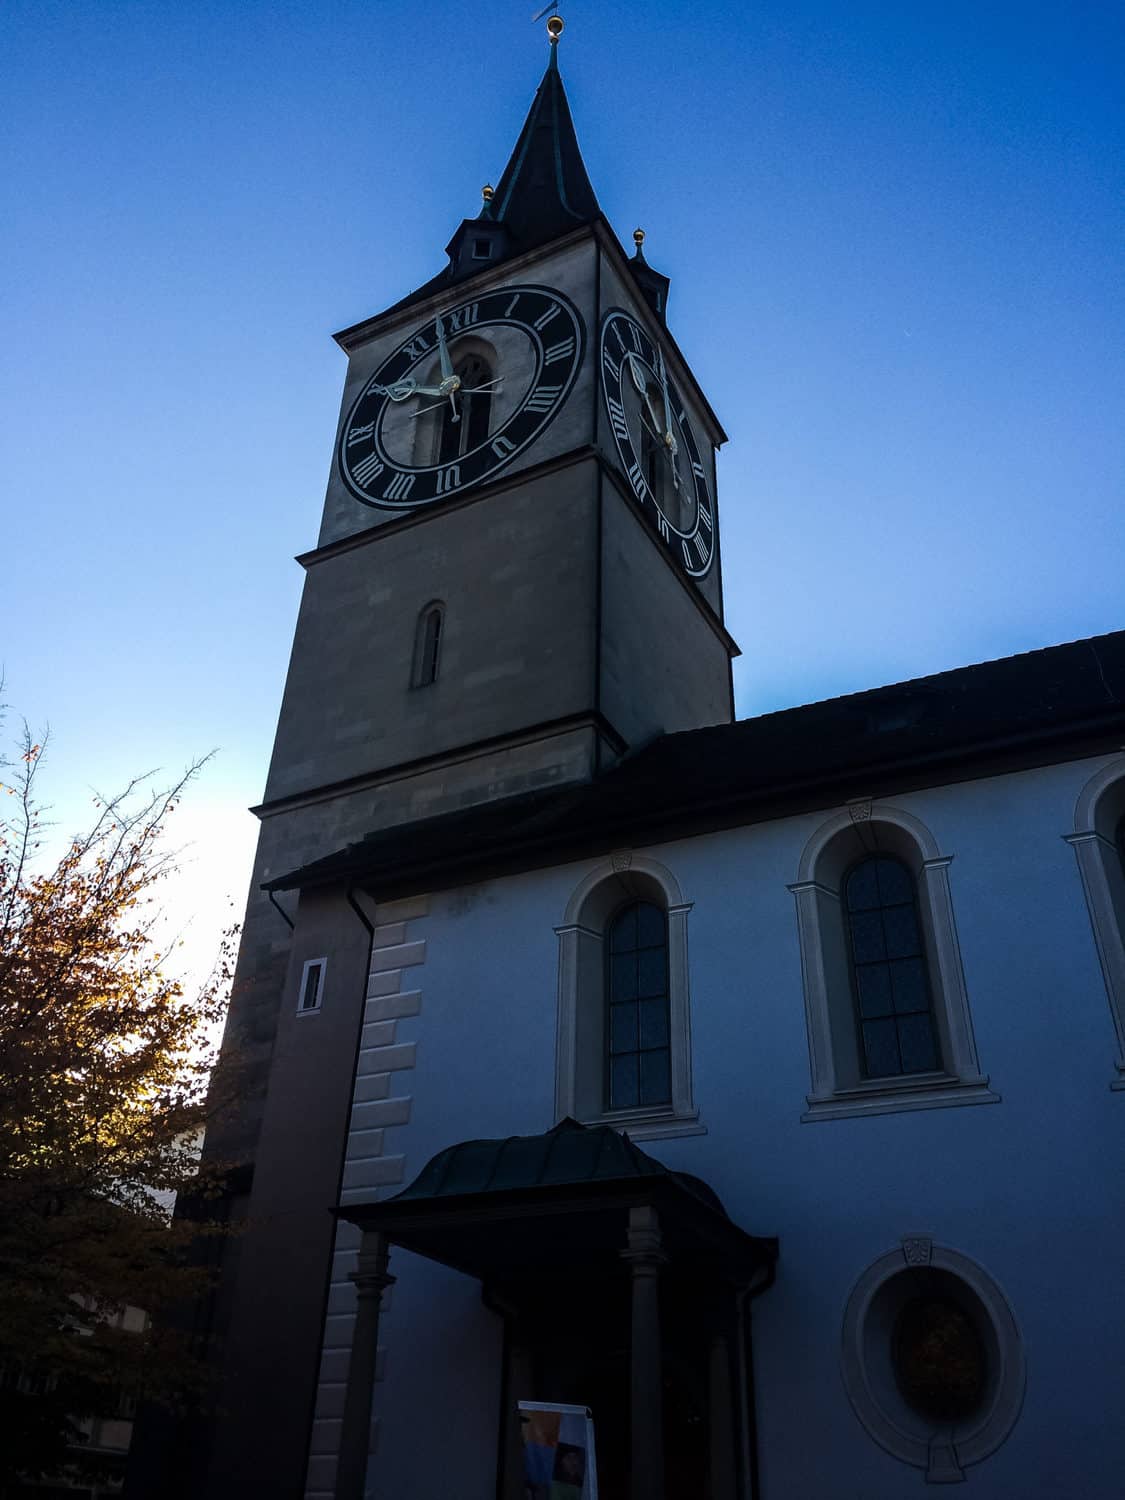 St Peter's Church clock tower at dawn of my one day in Zurich